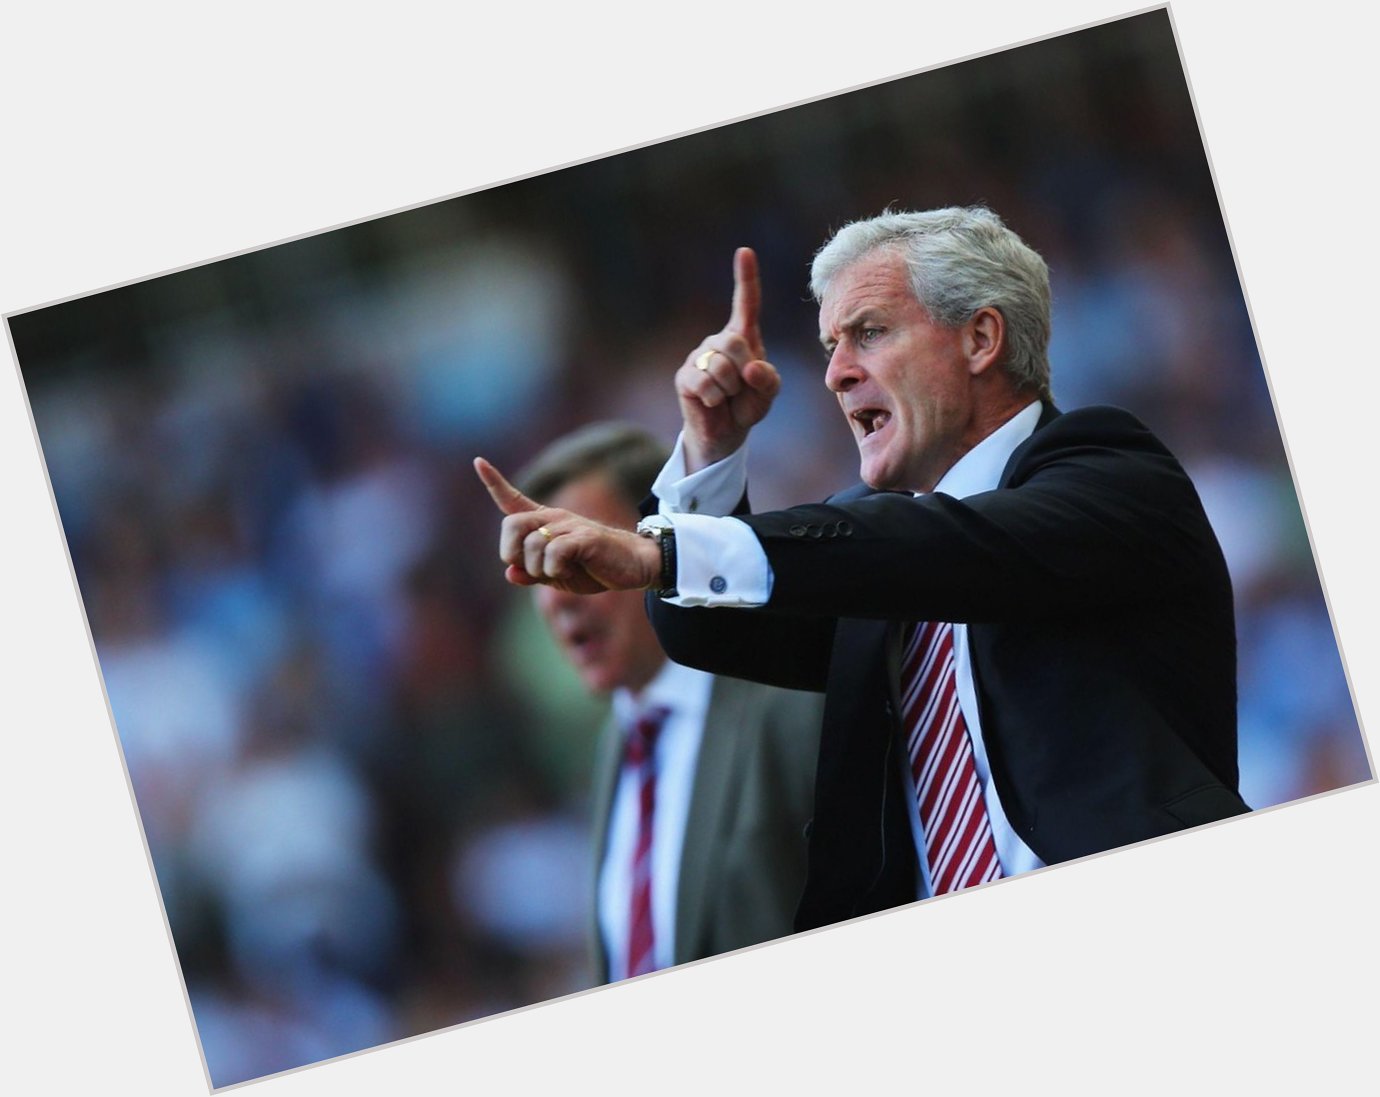 Manager Mark Hughes celebrates his 51st birthday against West Ham today. Happy Birthday gaffer! 3 points please 